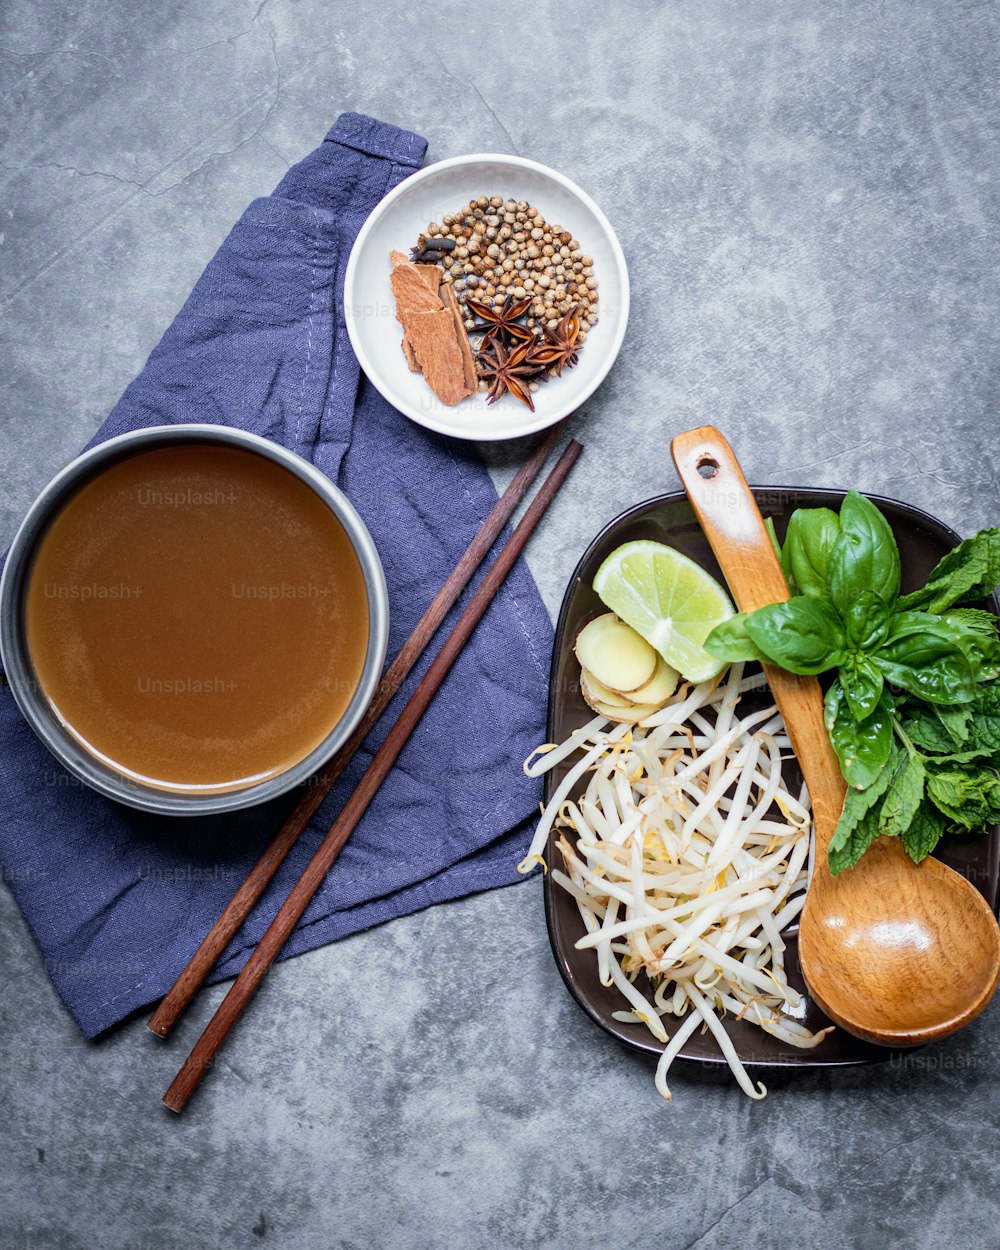 a plate of food with chopsticks and a cup of tea